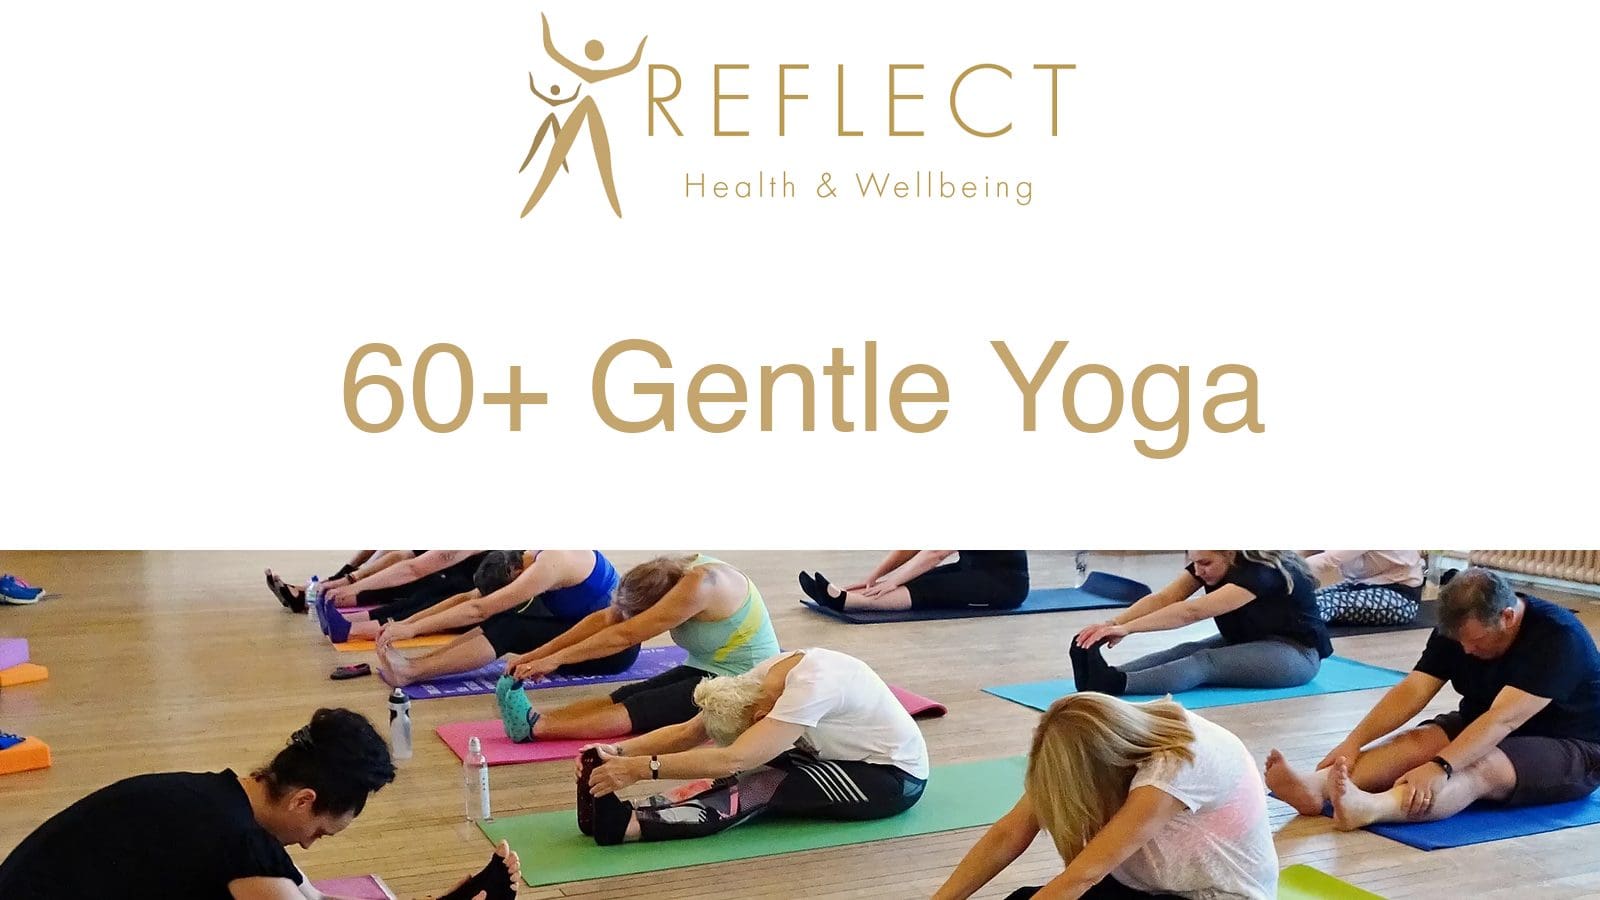 Thetford Bubbly Hub What's On and Events 60+ Gentle Yoga